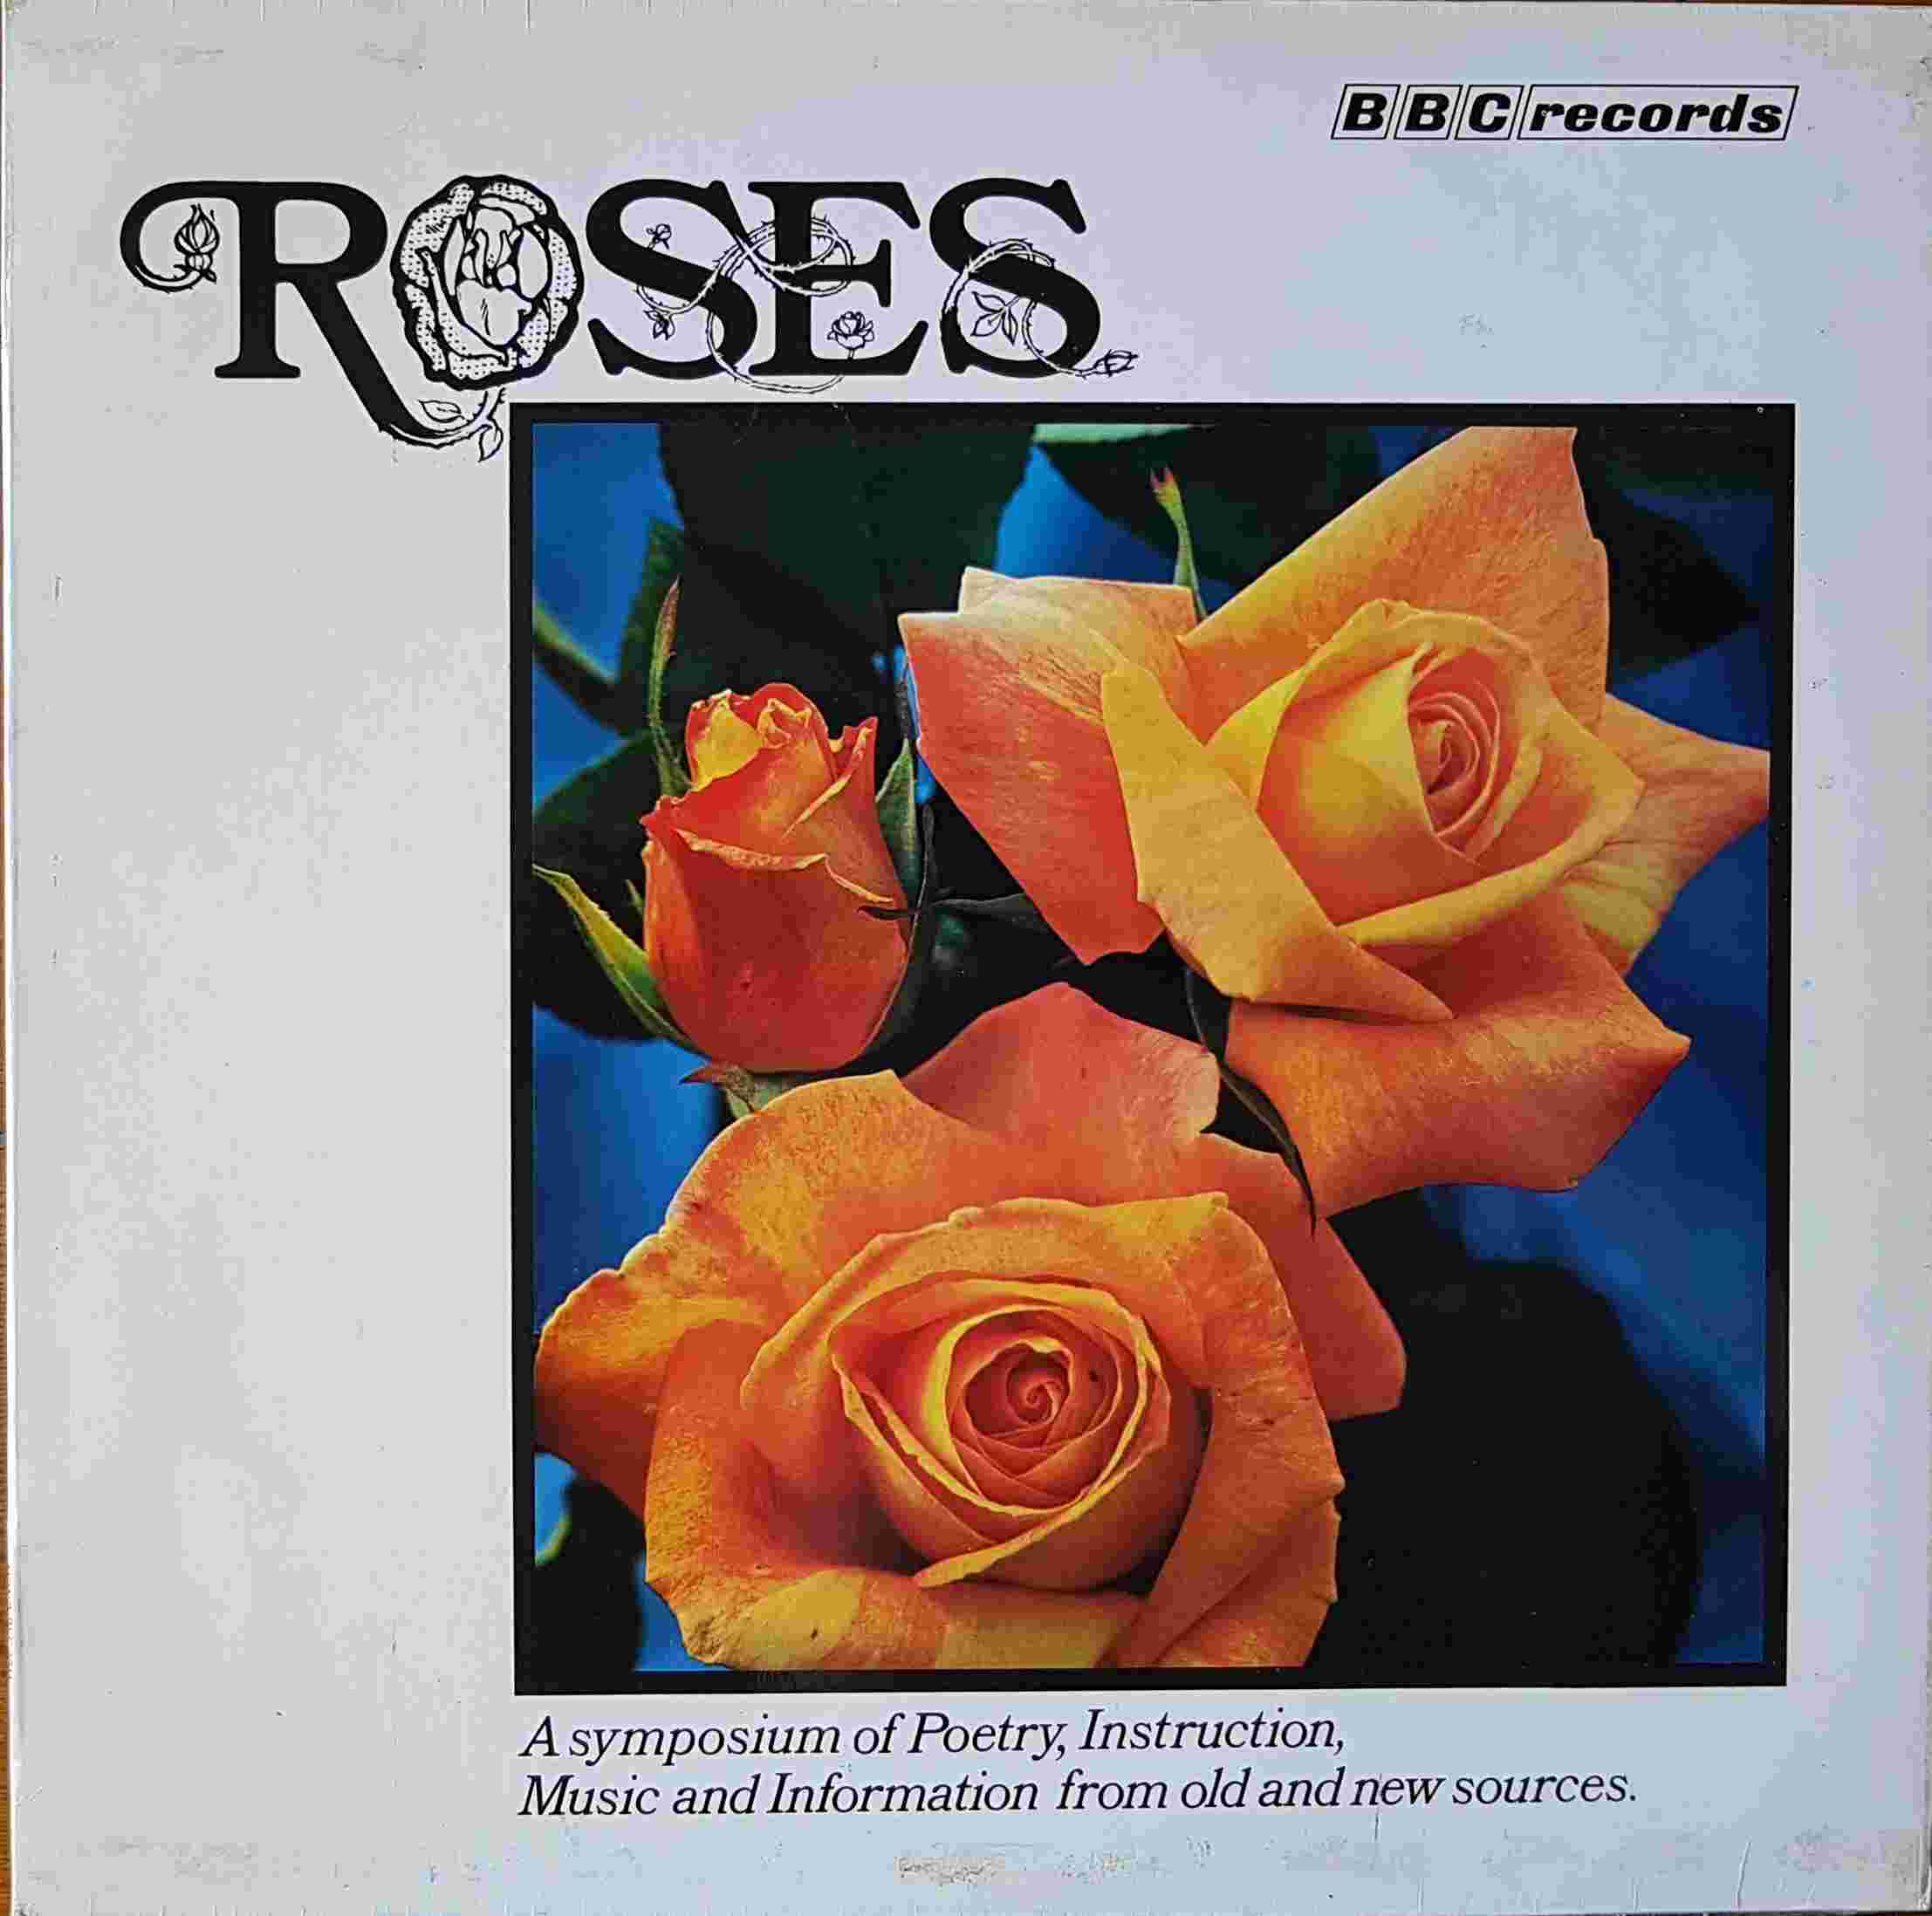 Picture of REC 99 Roses by artist Various from the BBC albums - Records and Tapes library